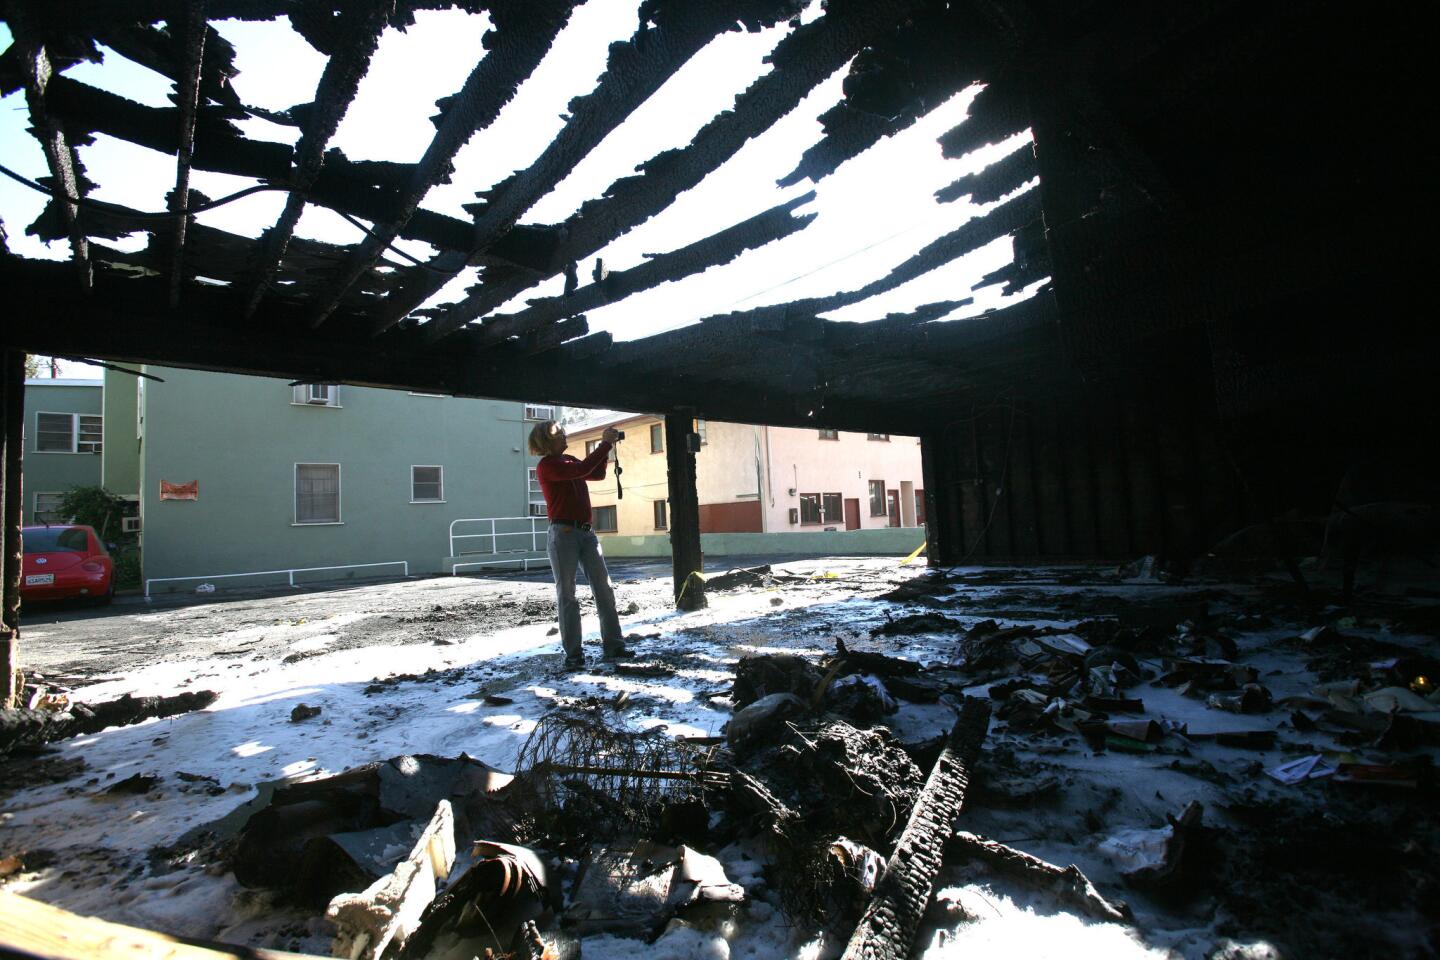 Heidi Schroeder takes photos of the damaged carport at a Sweetzer Avenue apartment complex in West Hollywood.